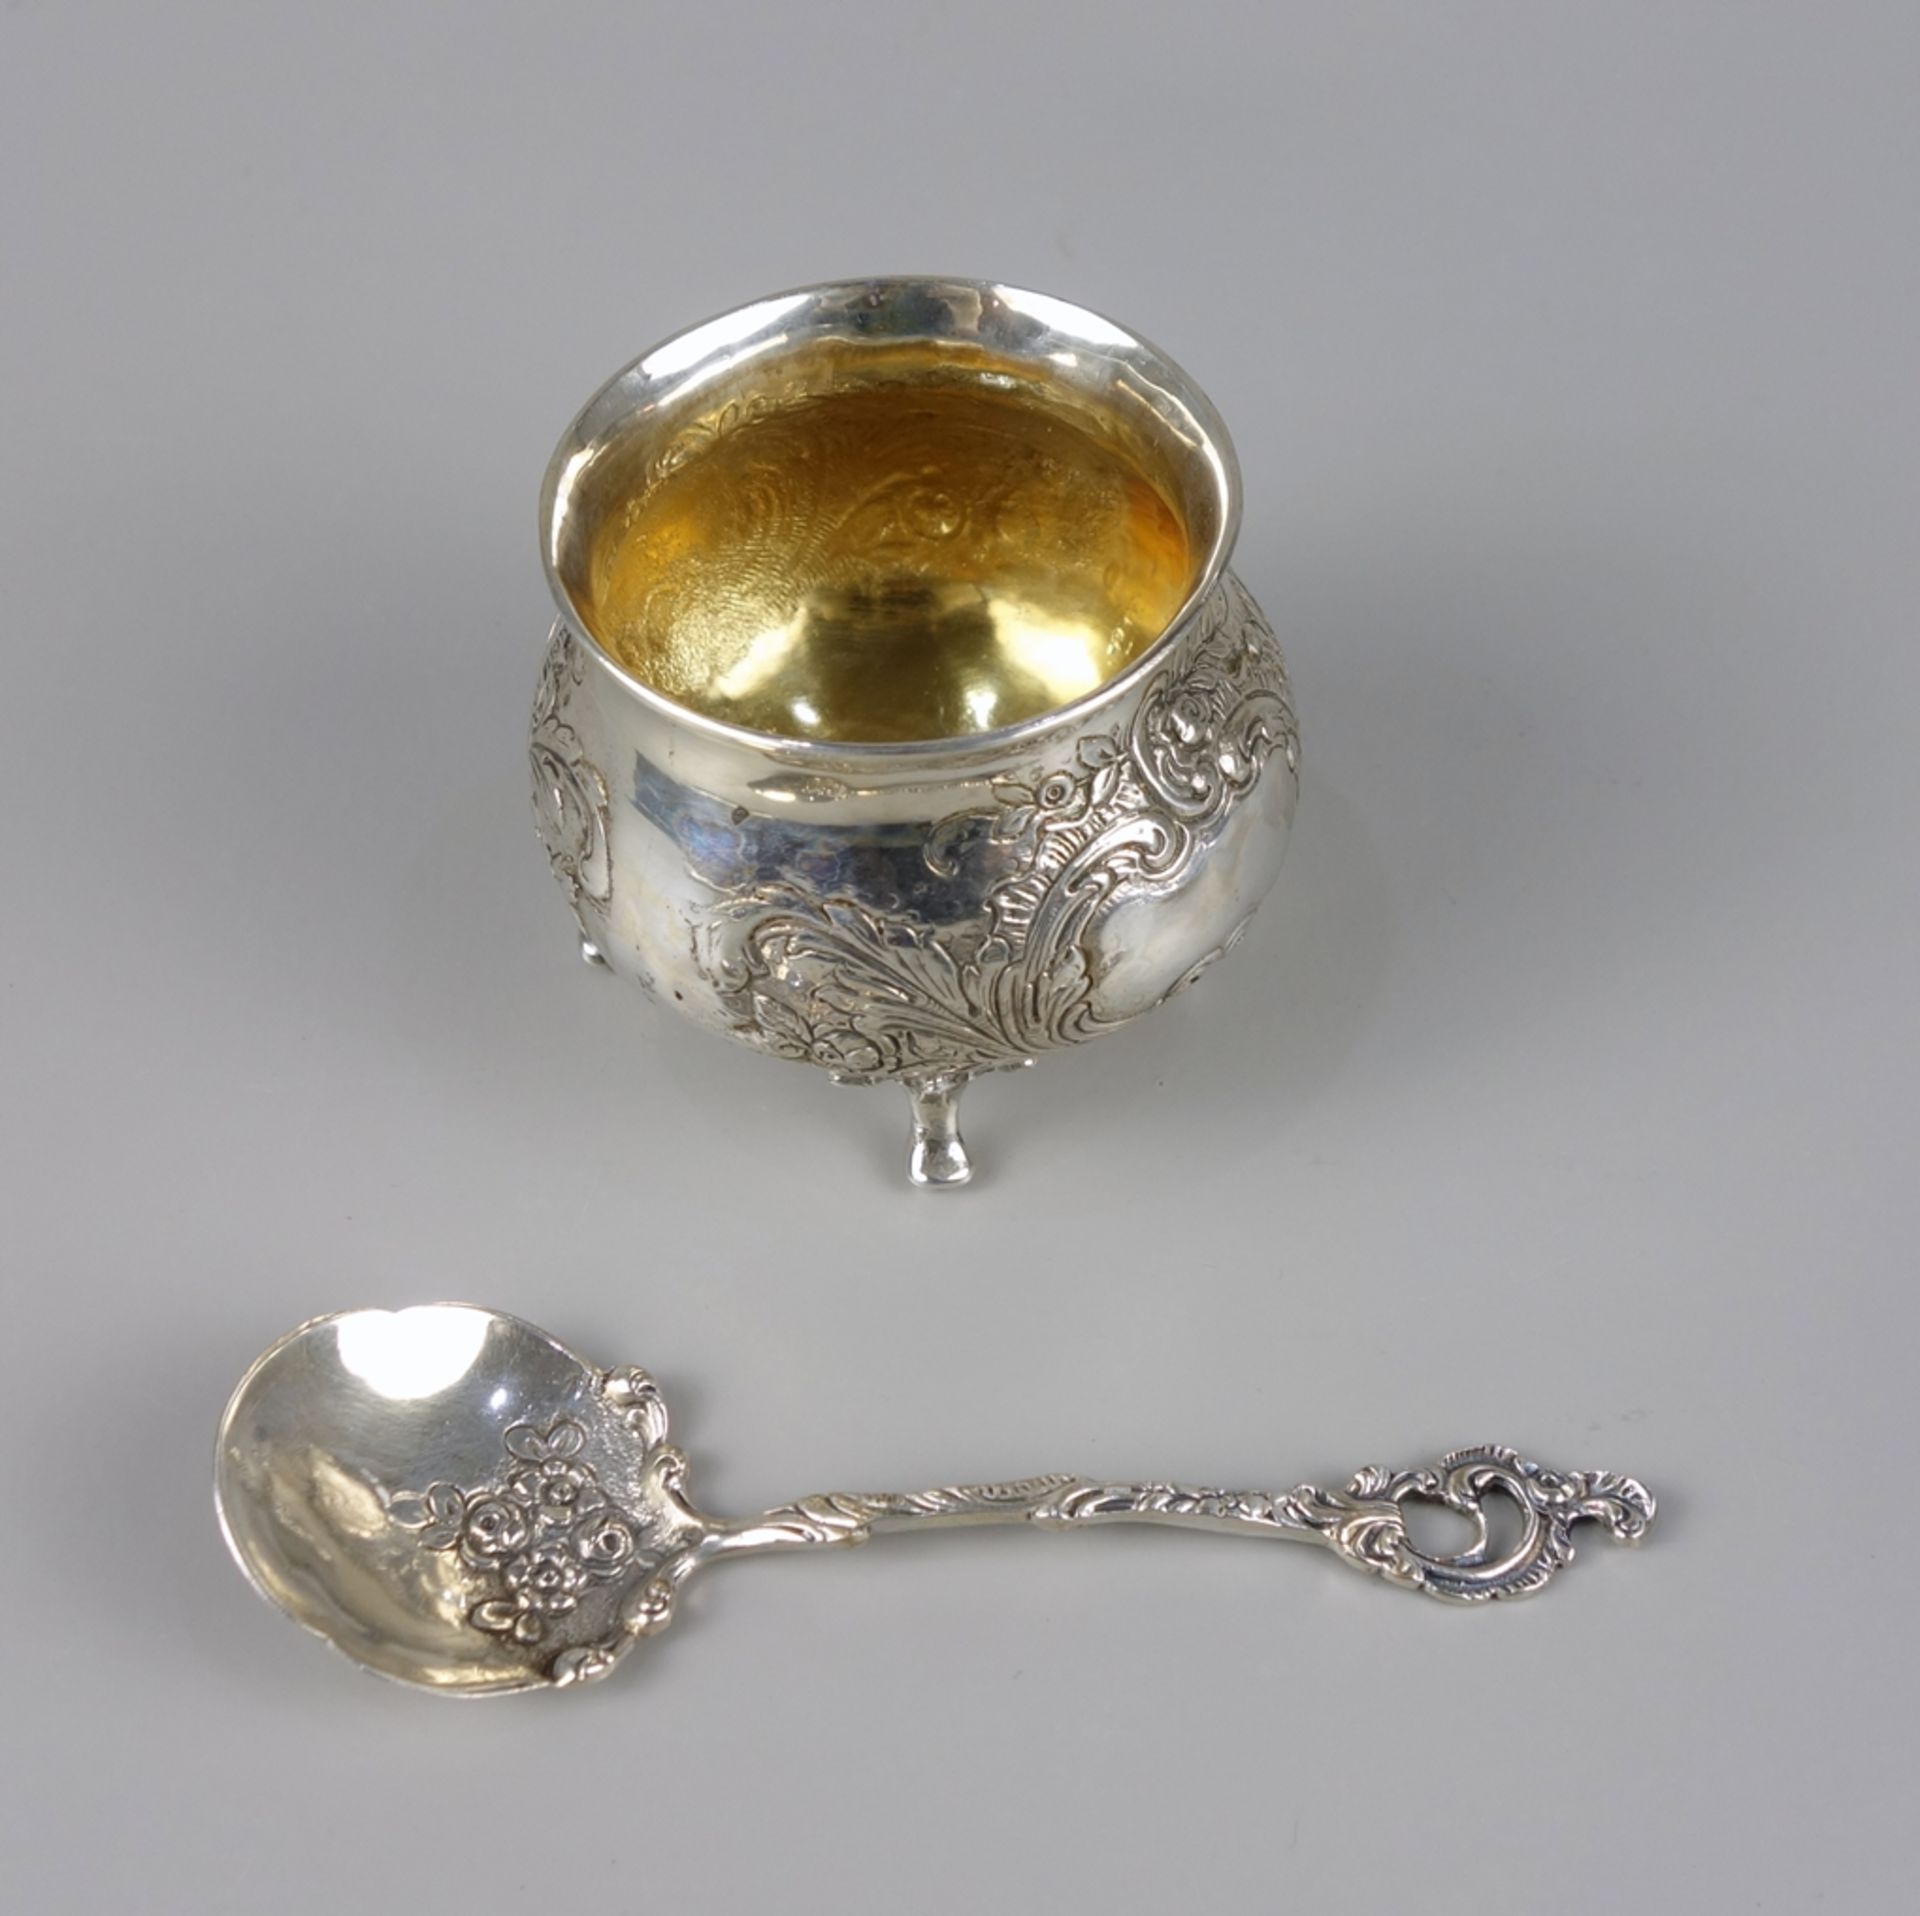 Cream pourer and sugar bowl with tray, floral rolled decoration, Christoph Widmann, 835 silver - Image 2 of 3